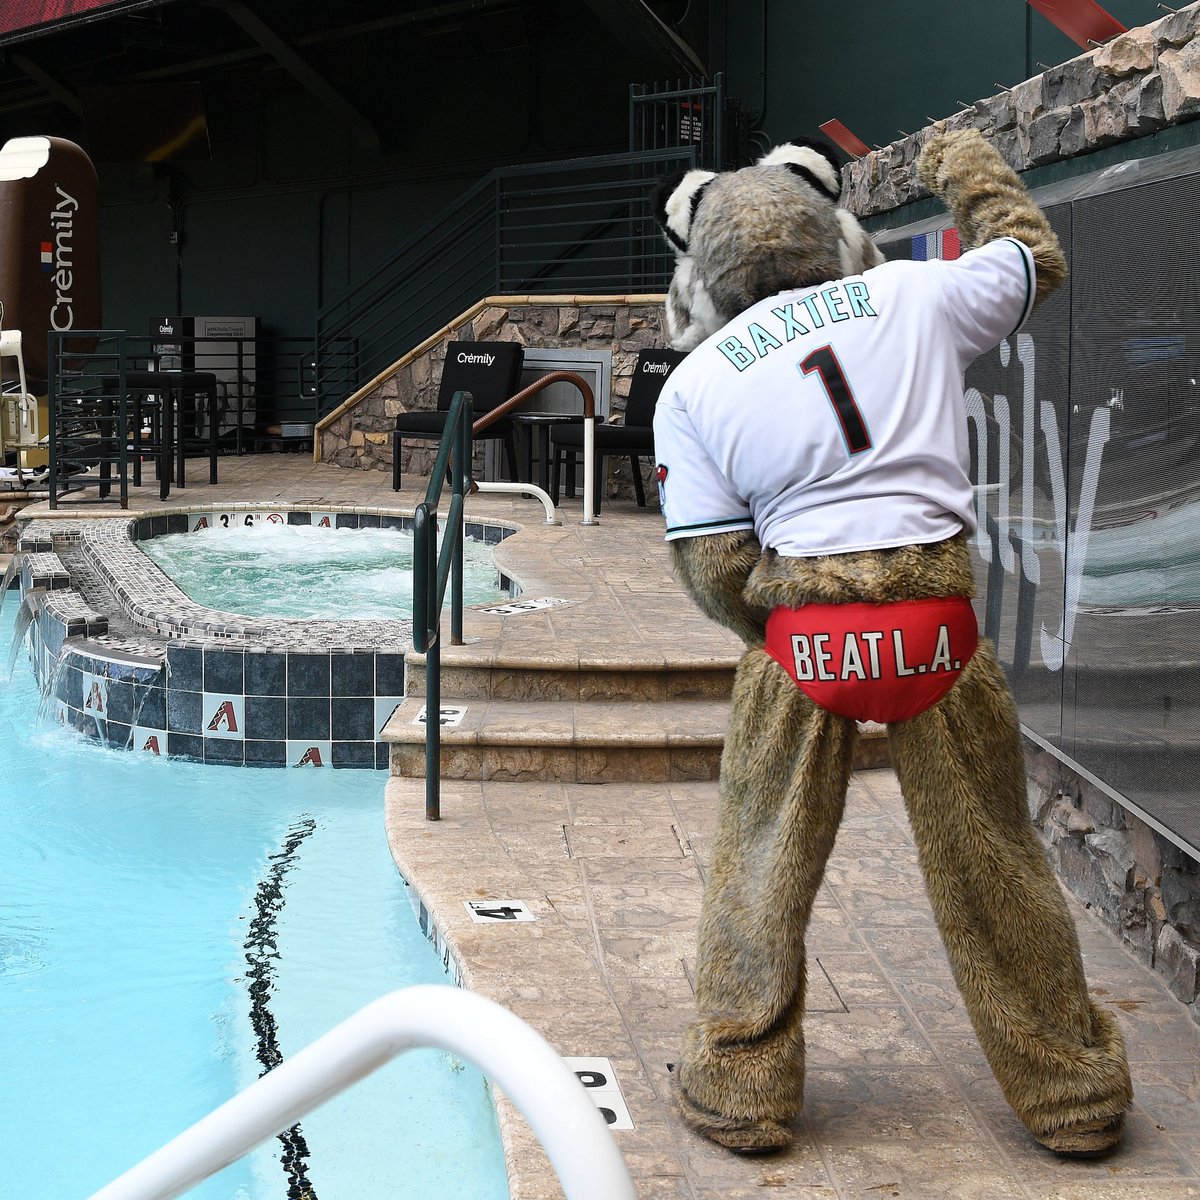 Taking a quick dip in the pool before Game 3 tonight. 😼 See you in a few hours, @Dbacks fans! #BeatLA